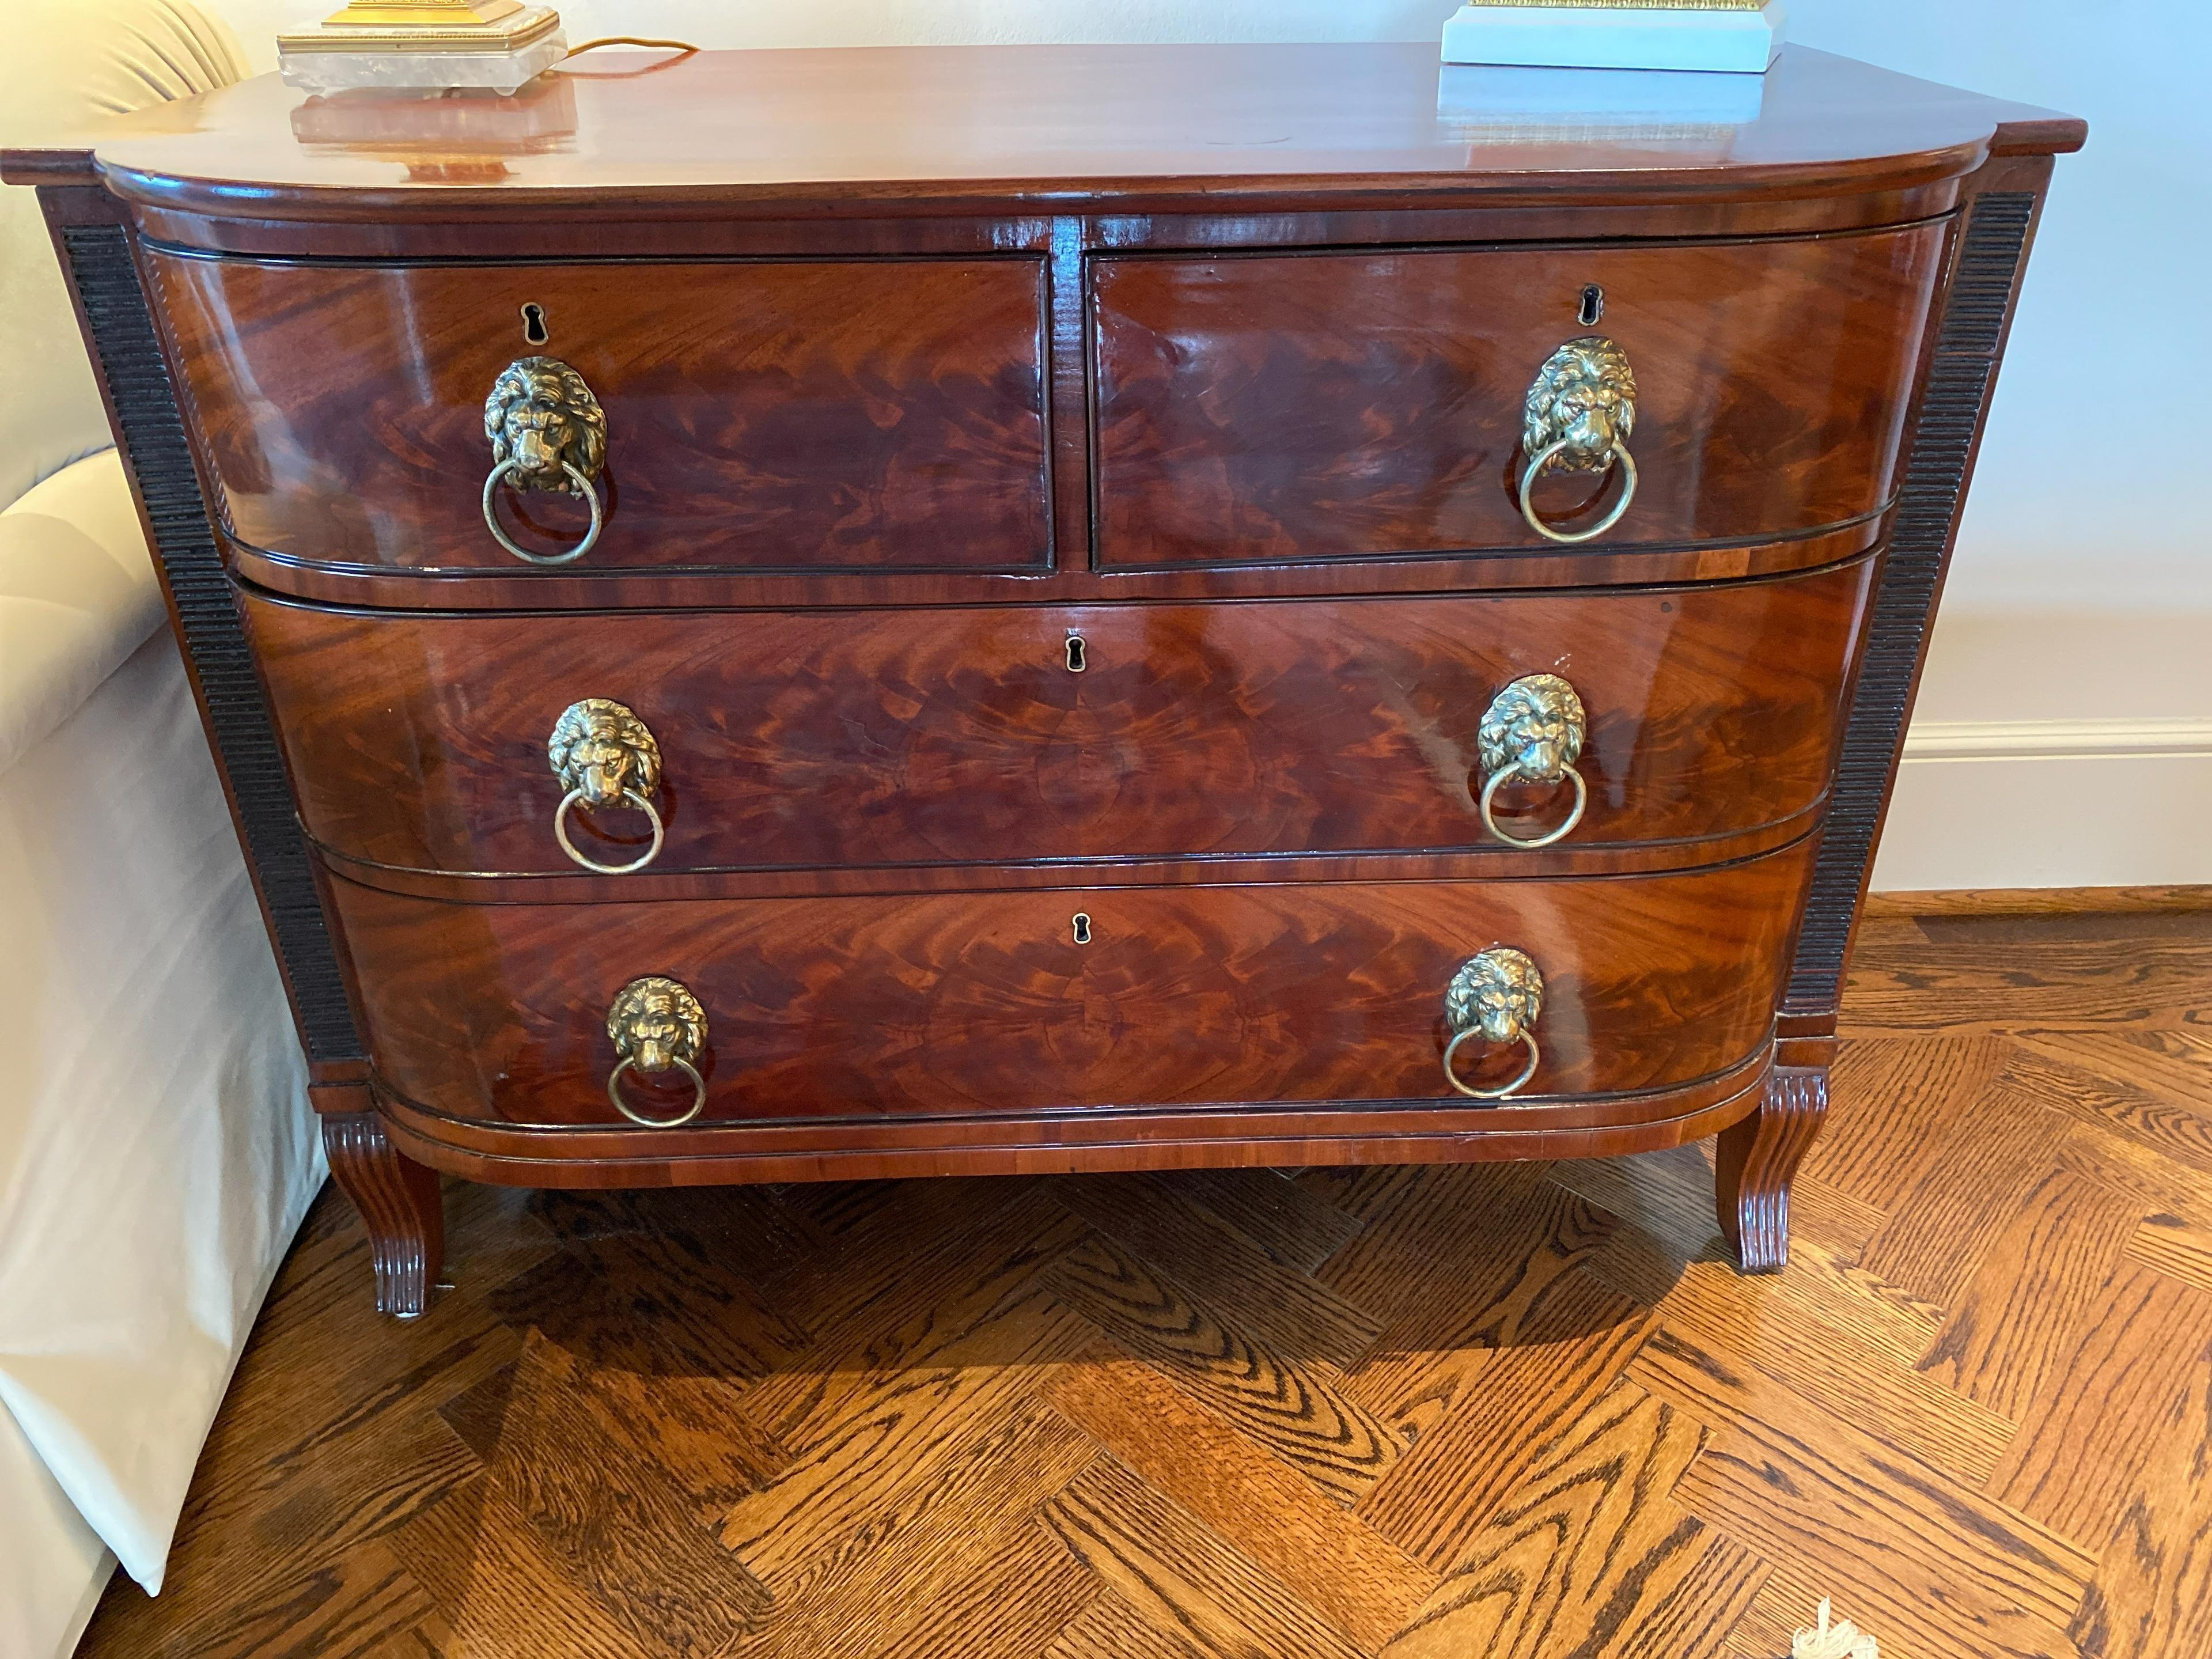 Beautiful and fine 19th century English Regency flame mahogany commode with brass Lions head pulls. Reeded carved detailed sides. Beautiful rich patina.